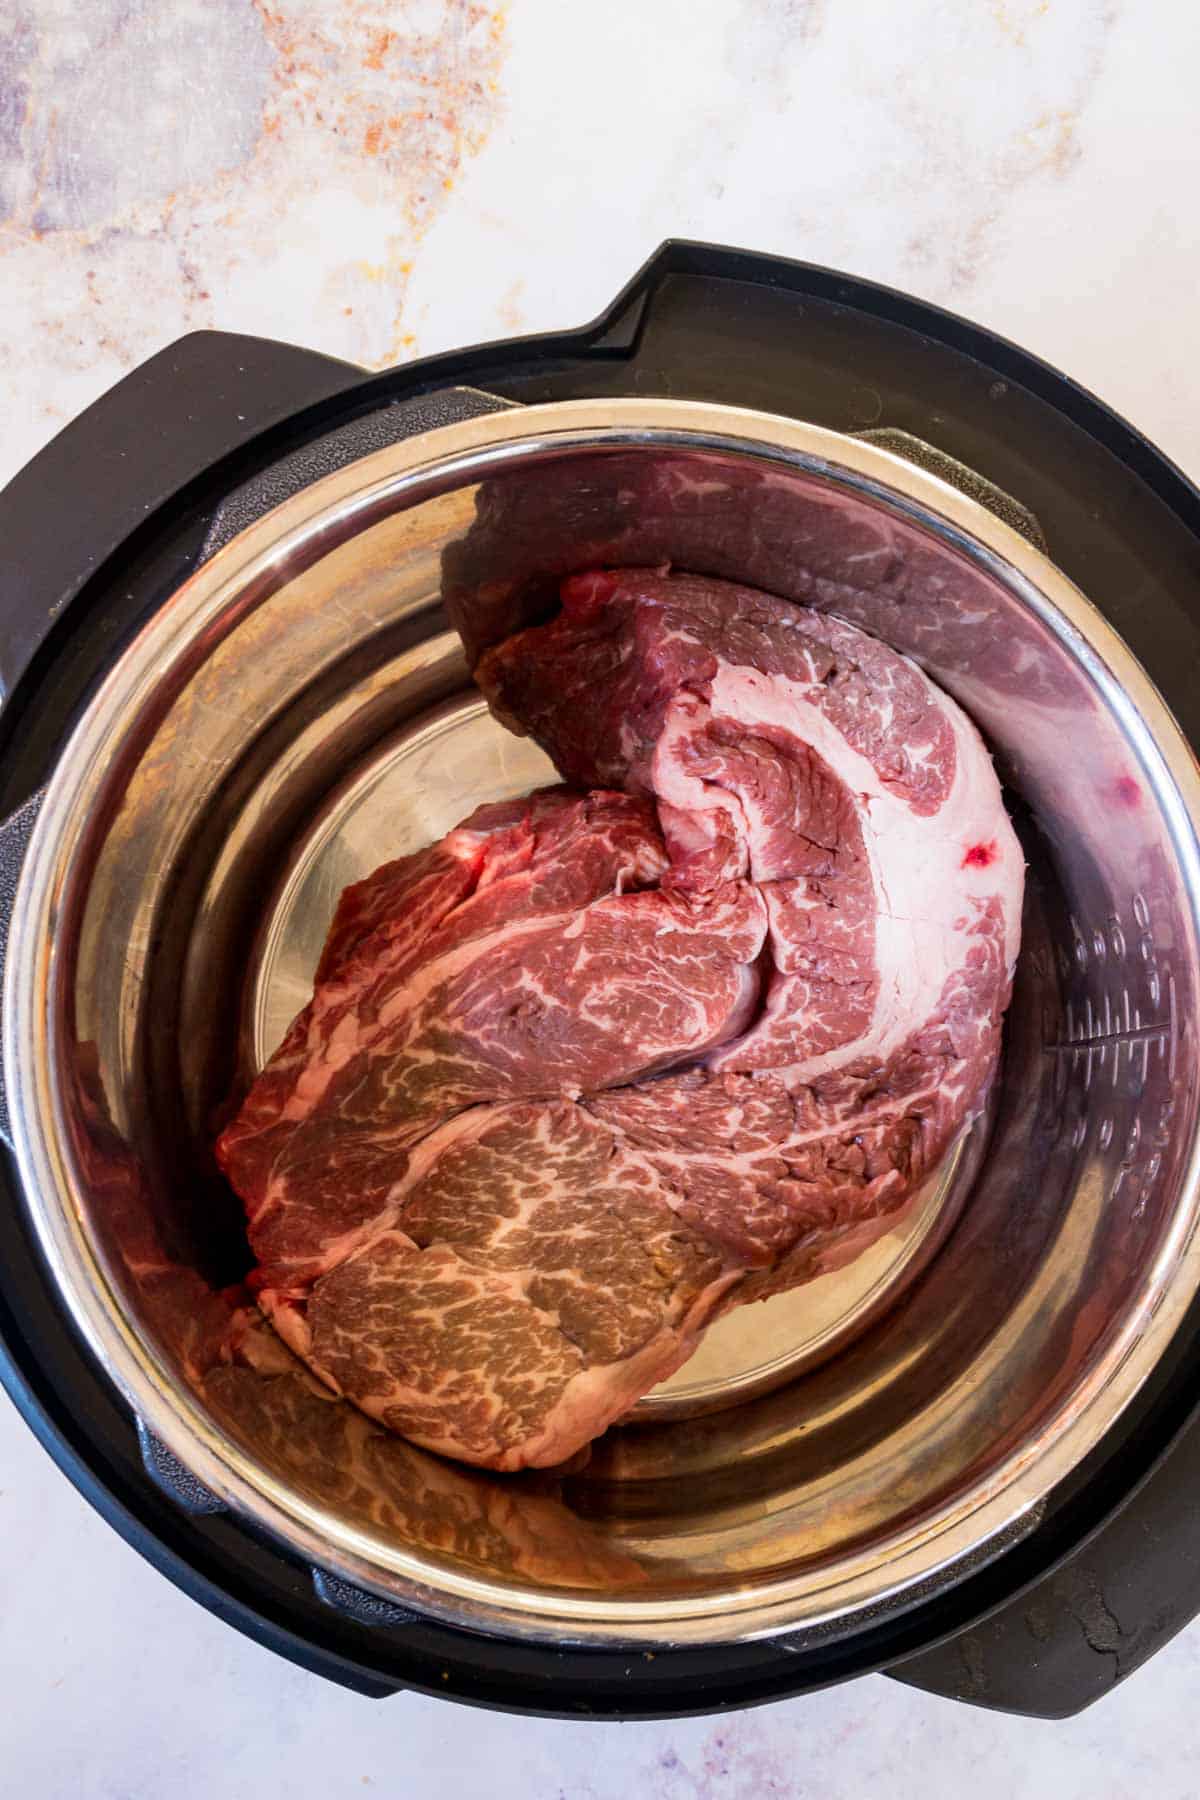 A chuck roast in the bowl of an Instant Pot.